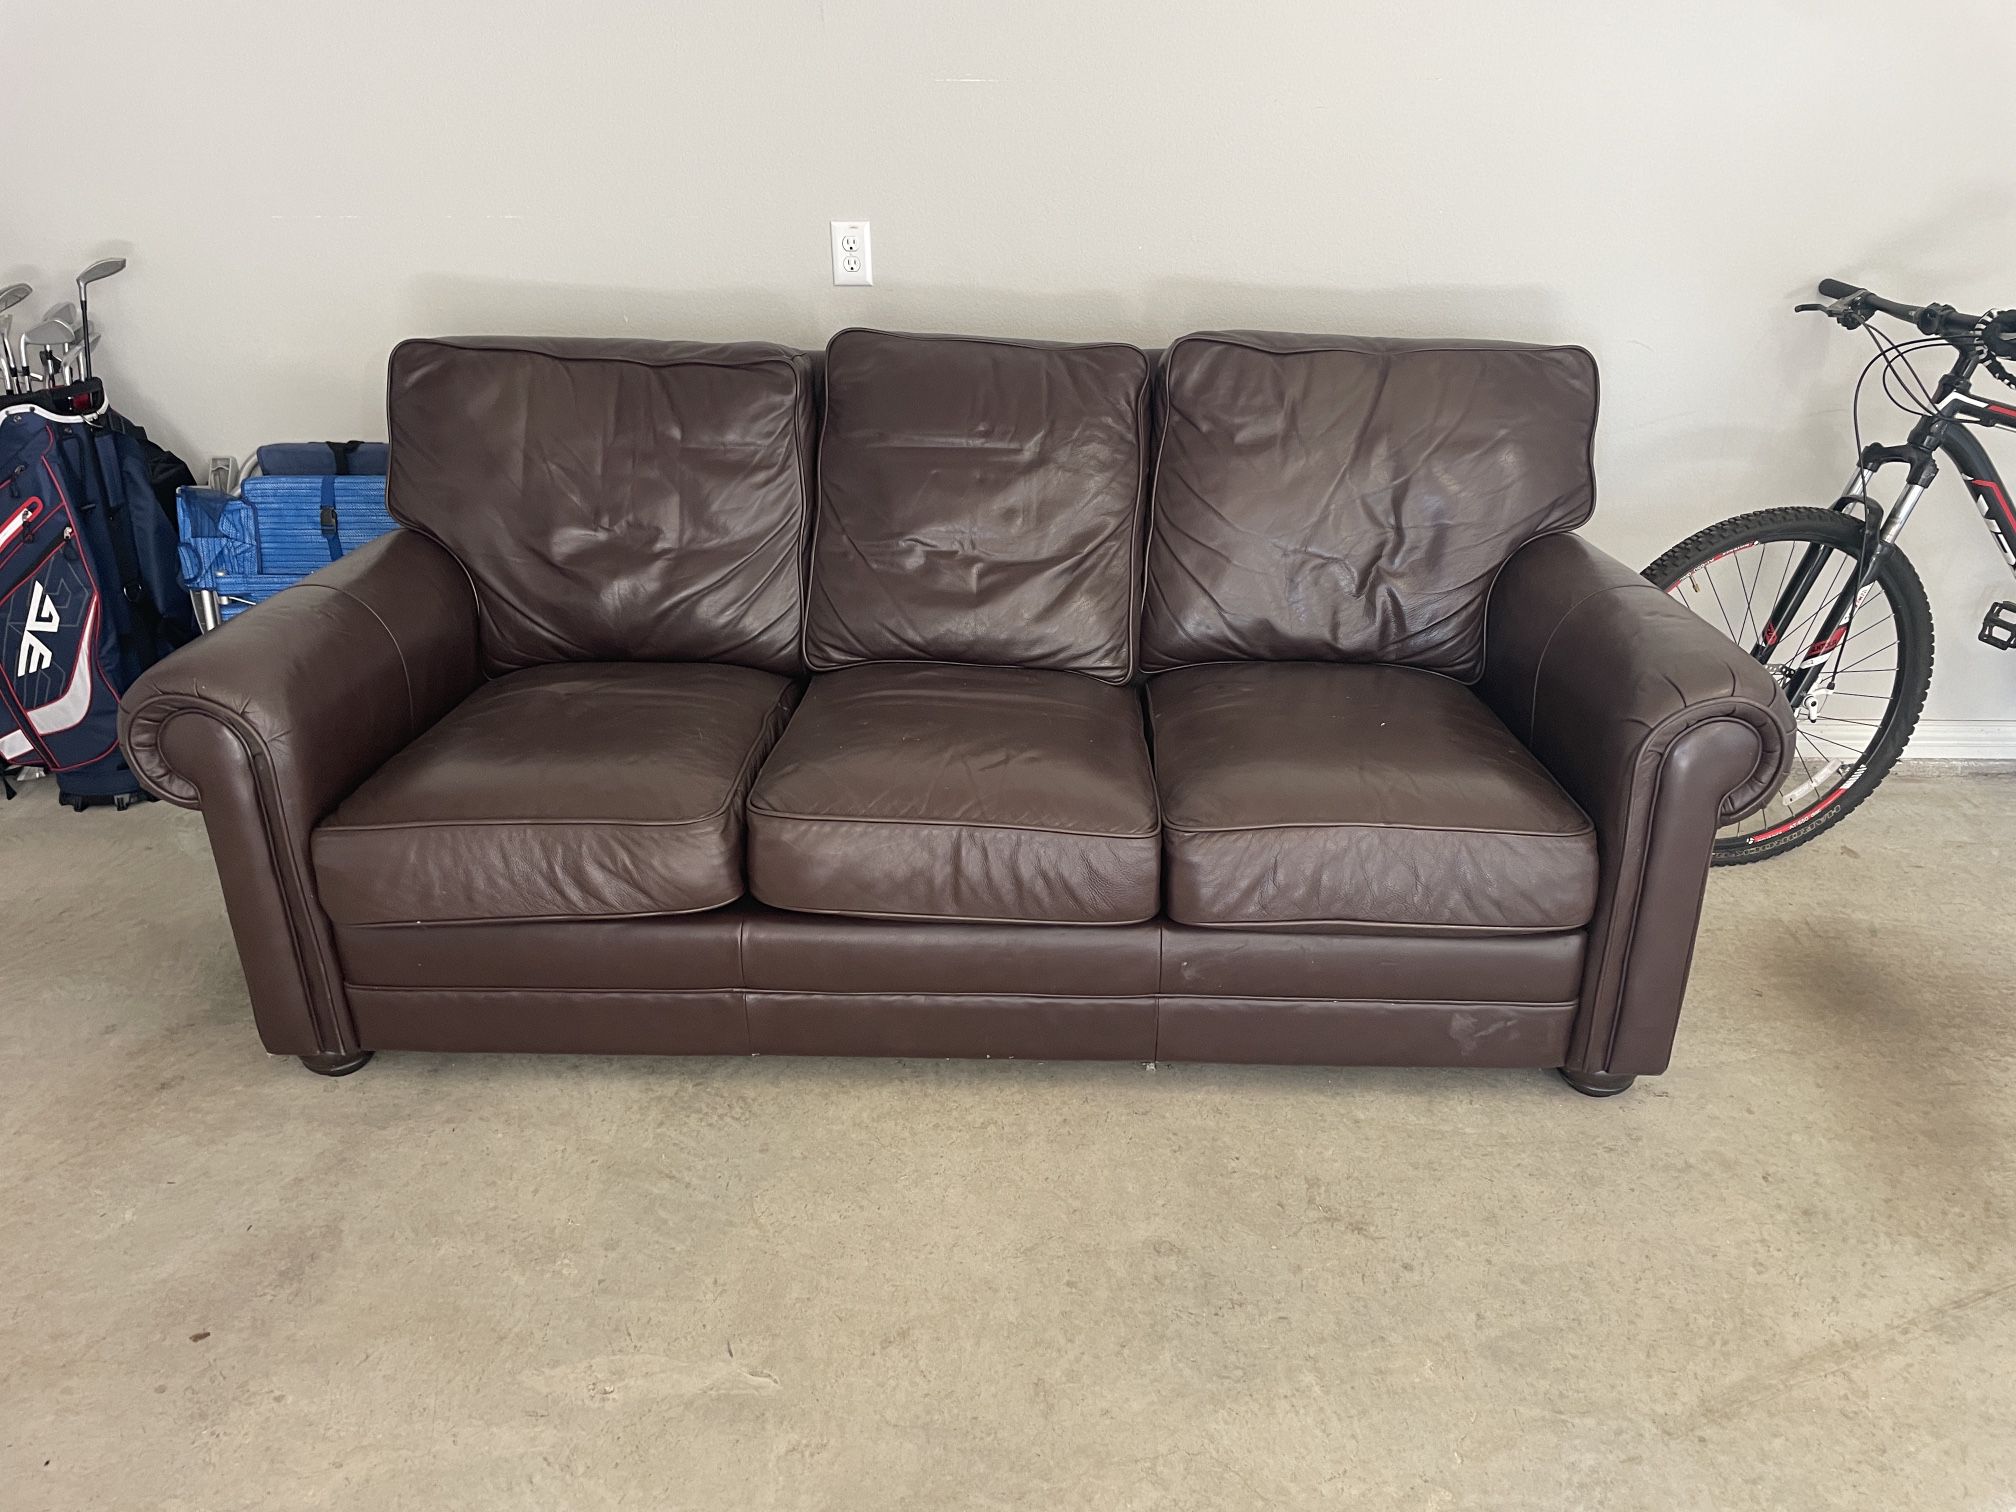 All Leather Couch - Quality